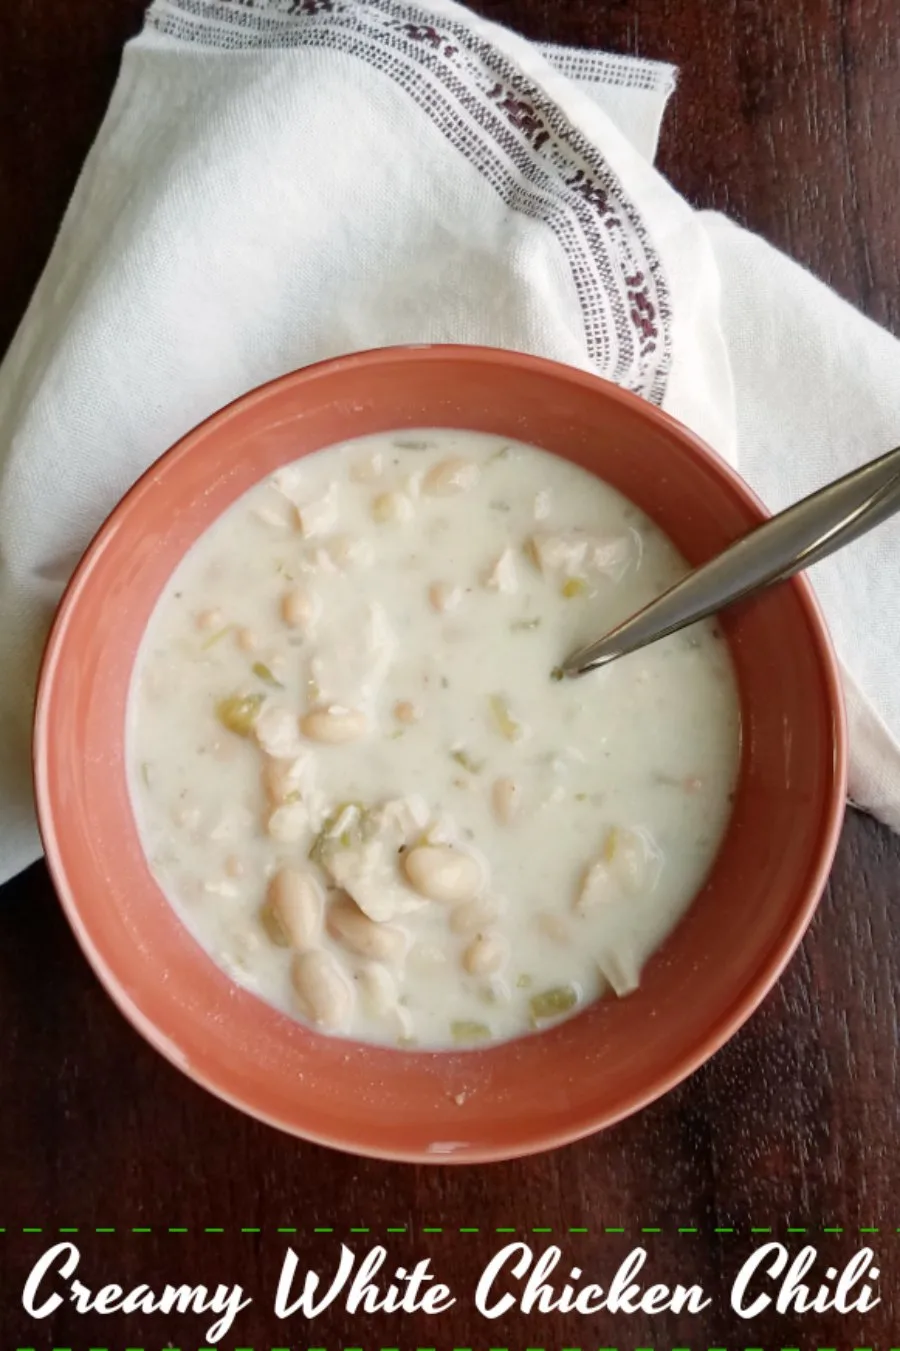 bowl of creamy white chicken chili ready to eat.